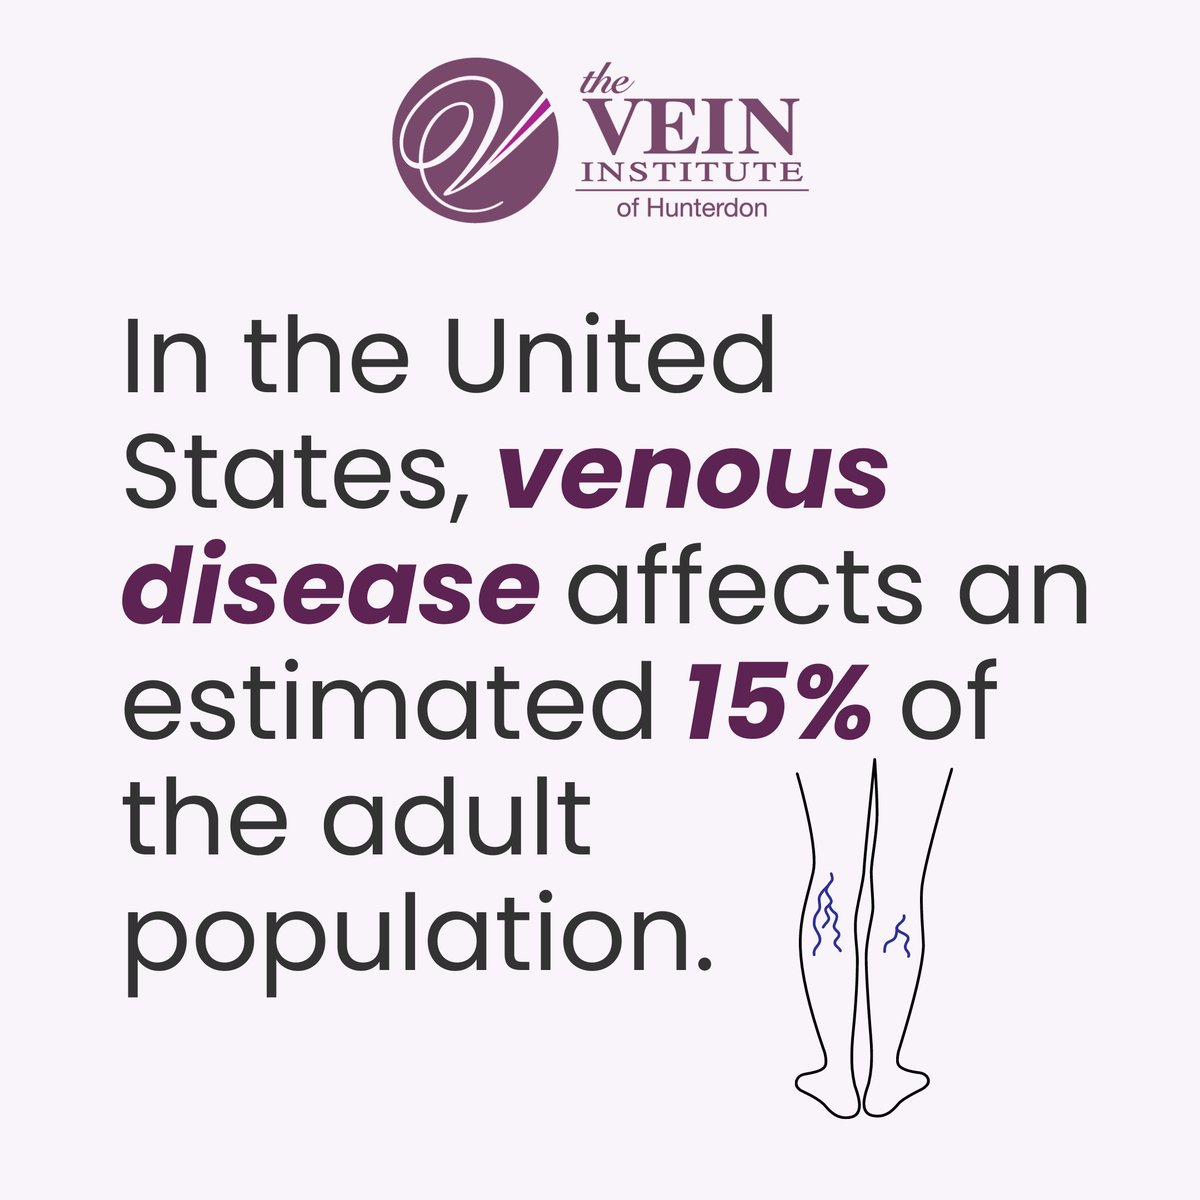 #Venousdisease is extremely common in the United States. Knowing the symptoms and types of venous diseases can help you determine whether it’s time to seek treatment from your provider. Contact us today for an evaluation. bit.ly/3Sun2NN